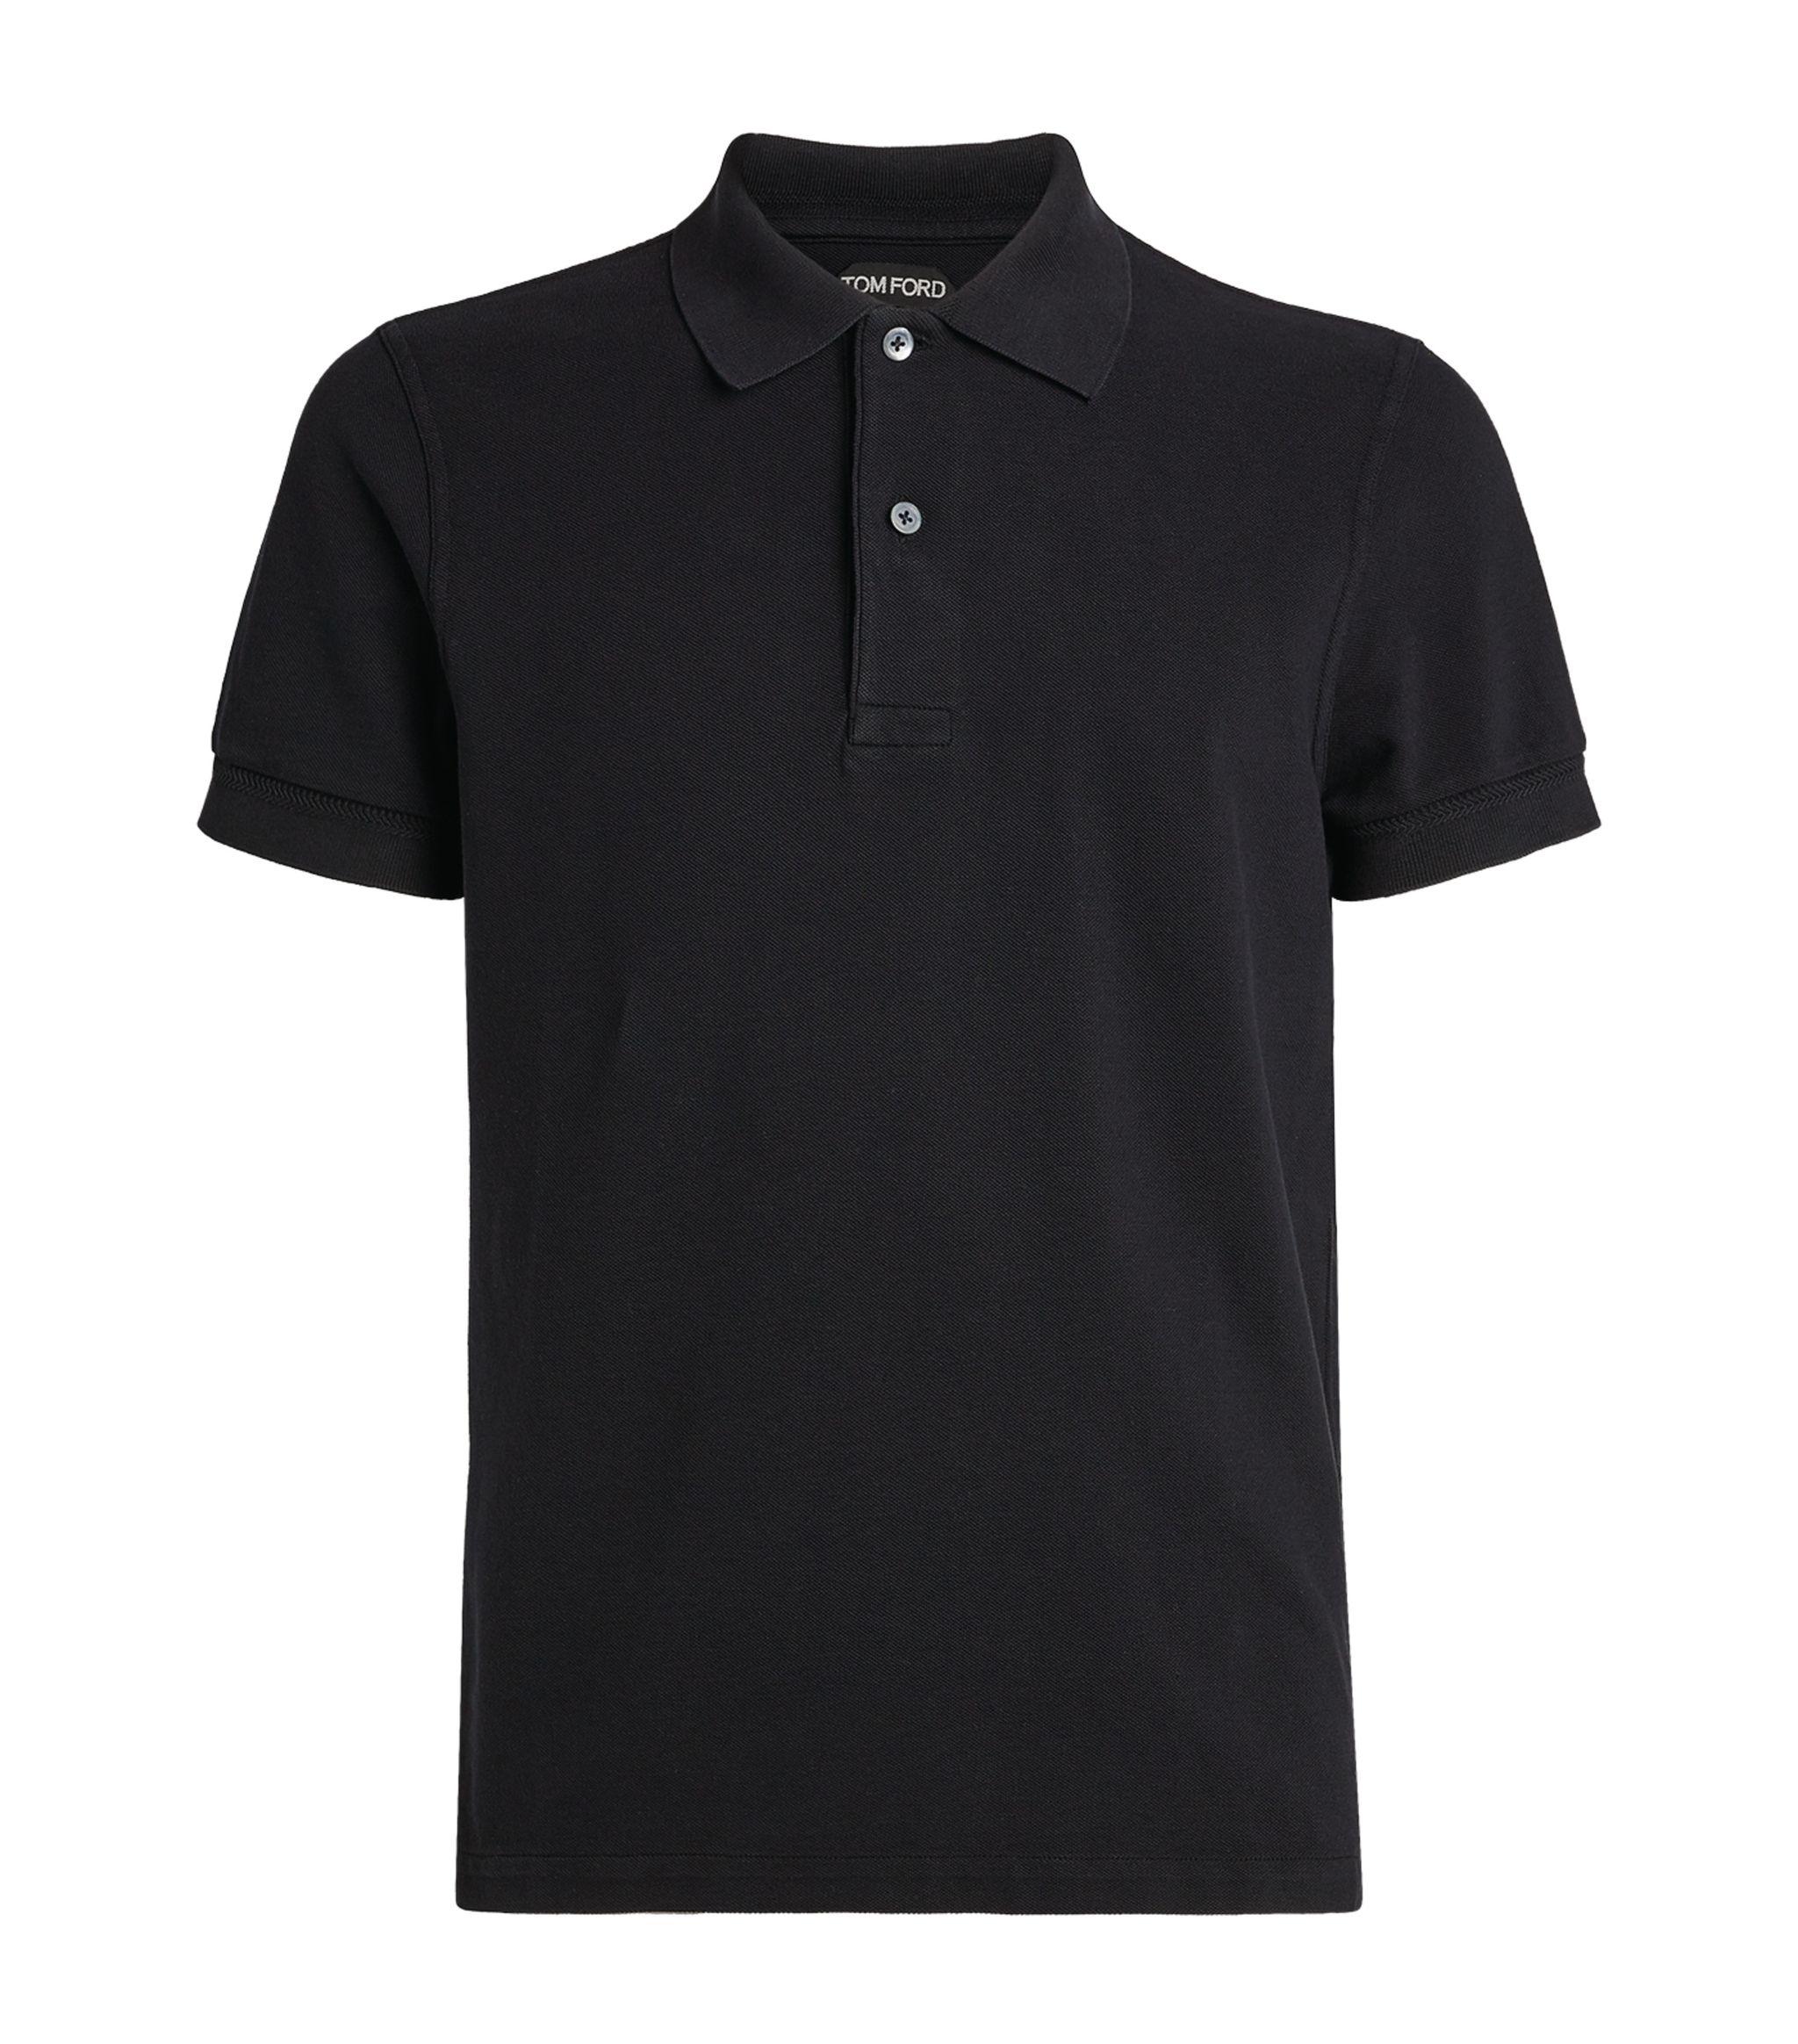 Tom Ford Cotton Tennis Polo Shirt in Blue for Men - Lyst